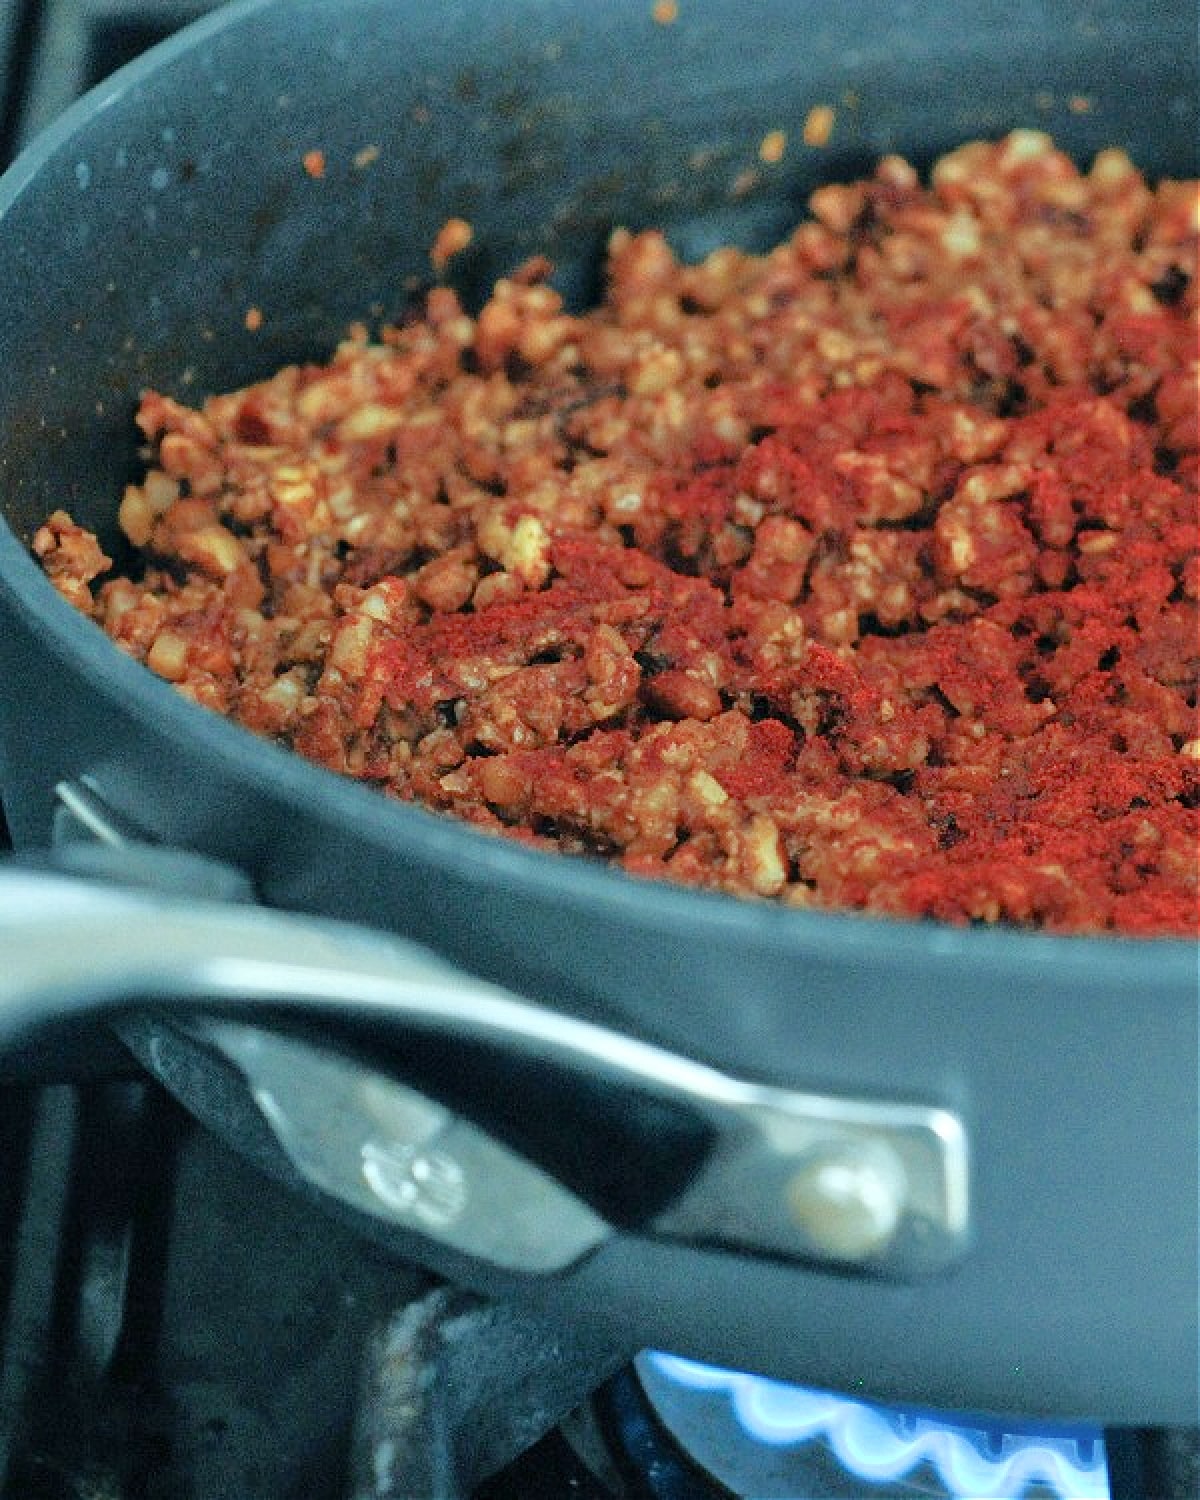 Vegan chorizo sausage in a skillet over a gas cooktop flame.